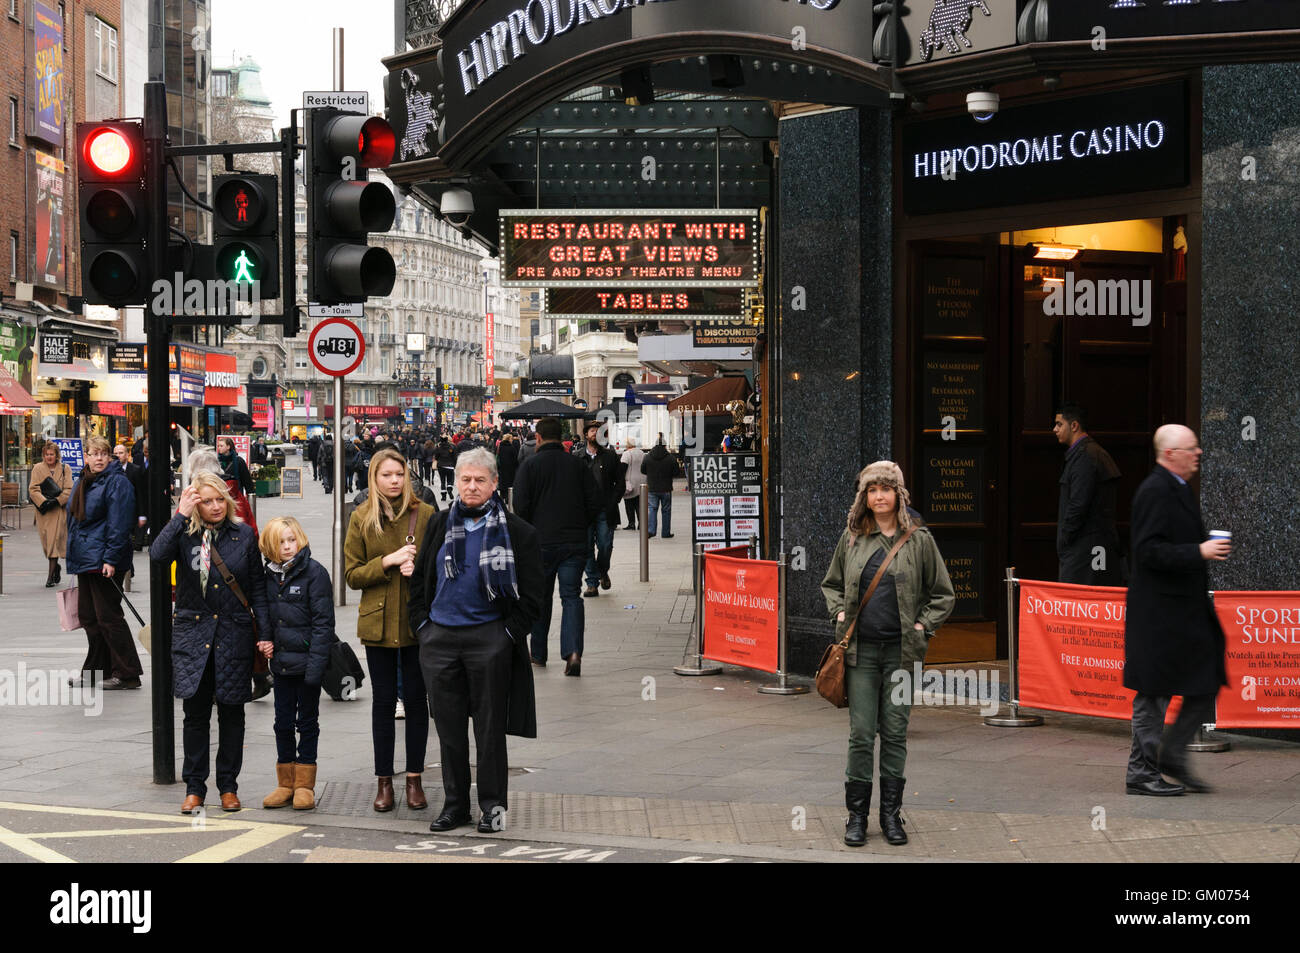 London Hippodrome casino is located at the corner of Charing Cross Road and Cranbourn Street leading to Leicester Square. Stock Photo